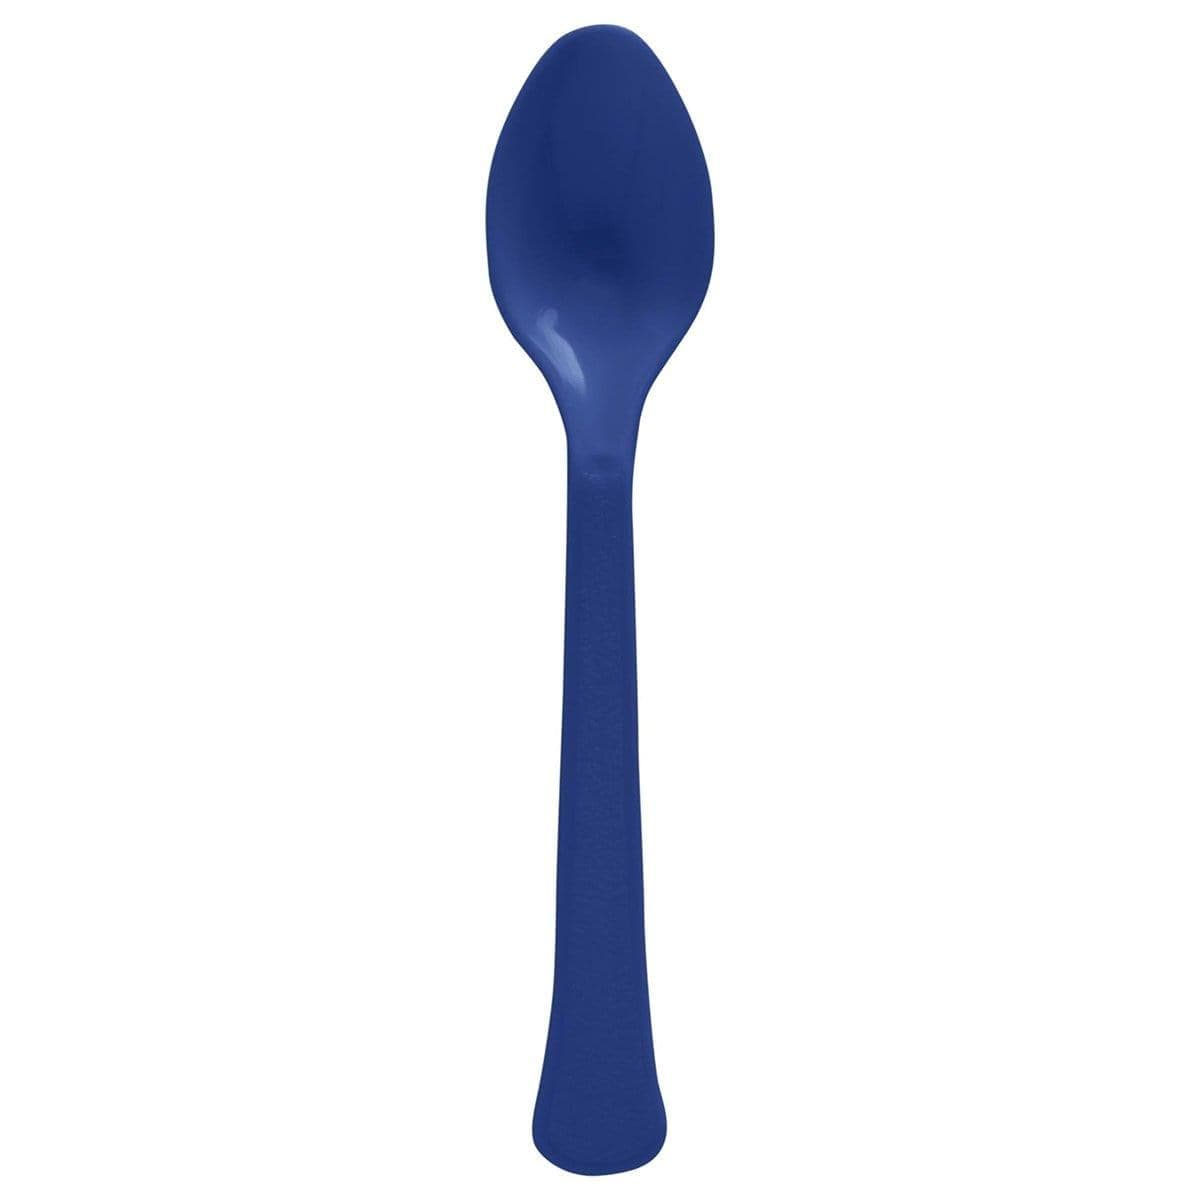 Buy Plasticware True Navy Plastic Spoons, 20 Count sold at Party Expert